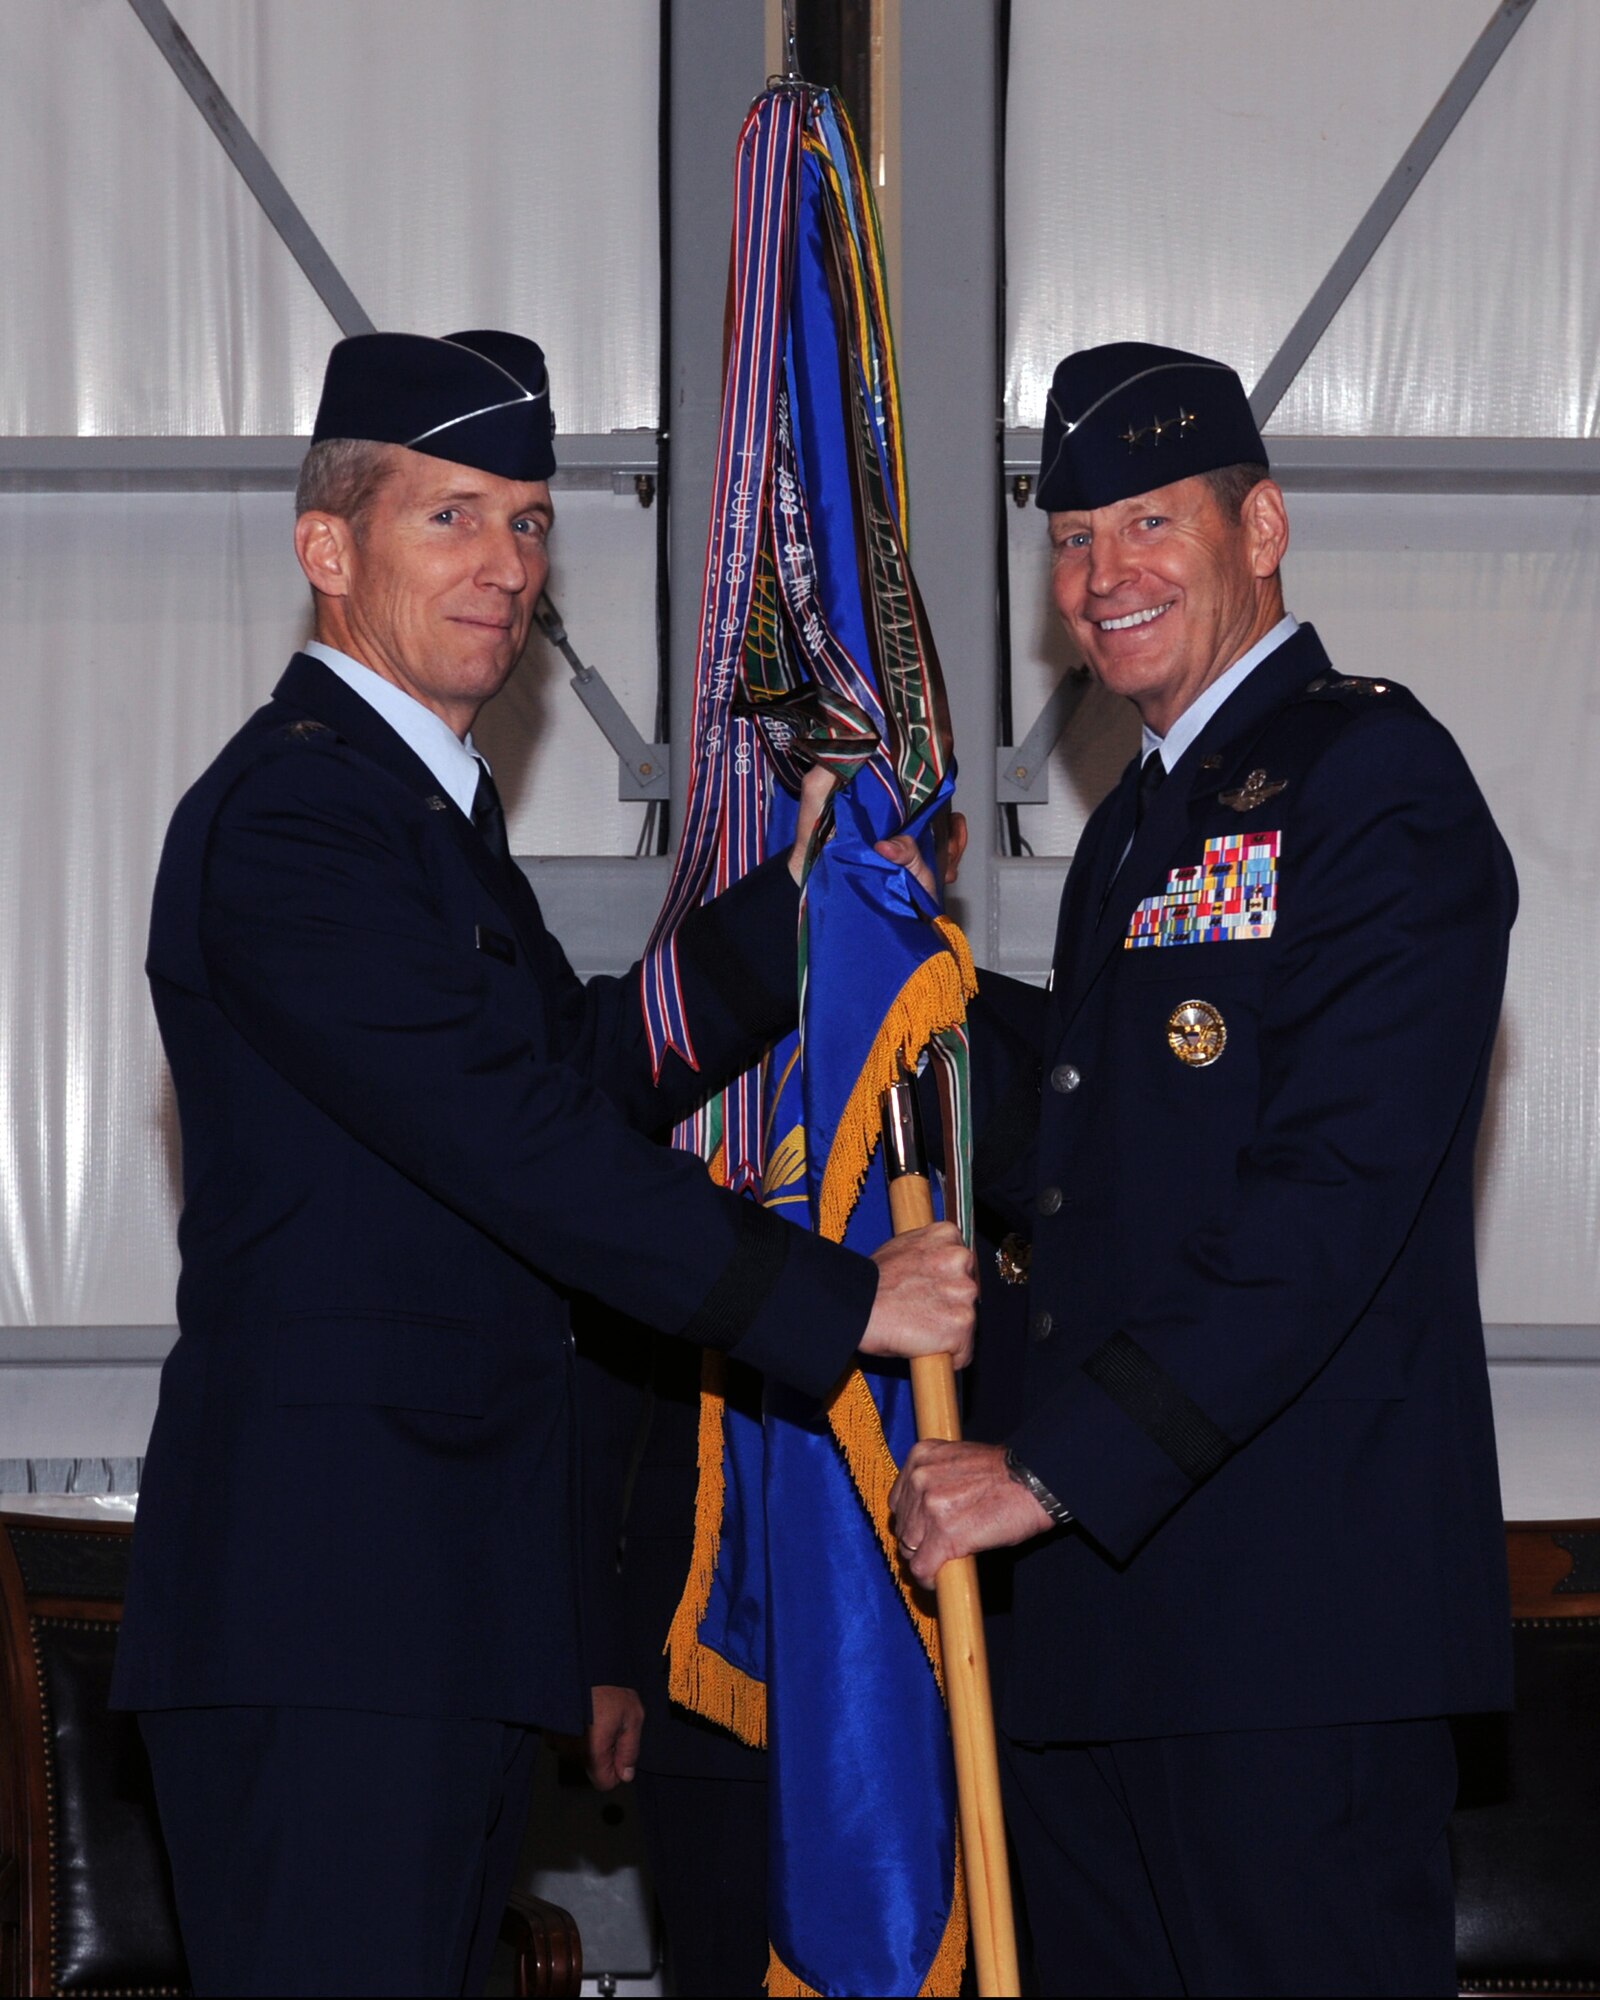 U.S. Air Force Lt. Gen. Robin Rand (right) receives the 12th Air Force (Air Forces Southern) guidon from U.S. Air Force Gen.  Mike Hostage, commander of Air Combat Command, during the assumption of command ceremony at Davis-Monthan Air Force Base, Ariz., Dec. 1. As the air component commander of U.S. Southern Command, the general will conduct security cooperation and provide air, space and cyberspace capabilities throughout the 31 nations of Latin America and the Caribbean. (U.S. Air Force photo by Airman 1st Class Christine Griffiths/Released)